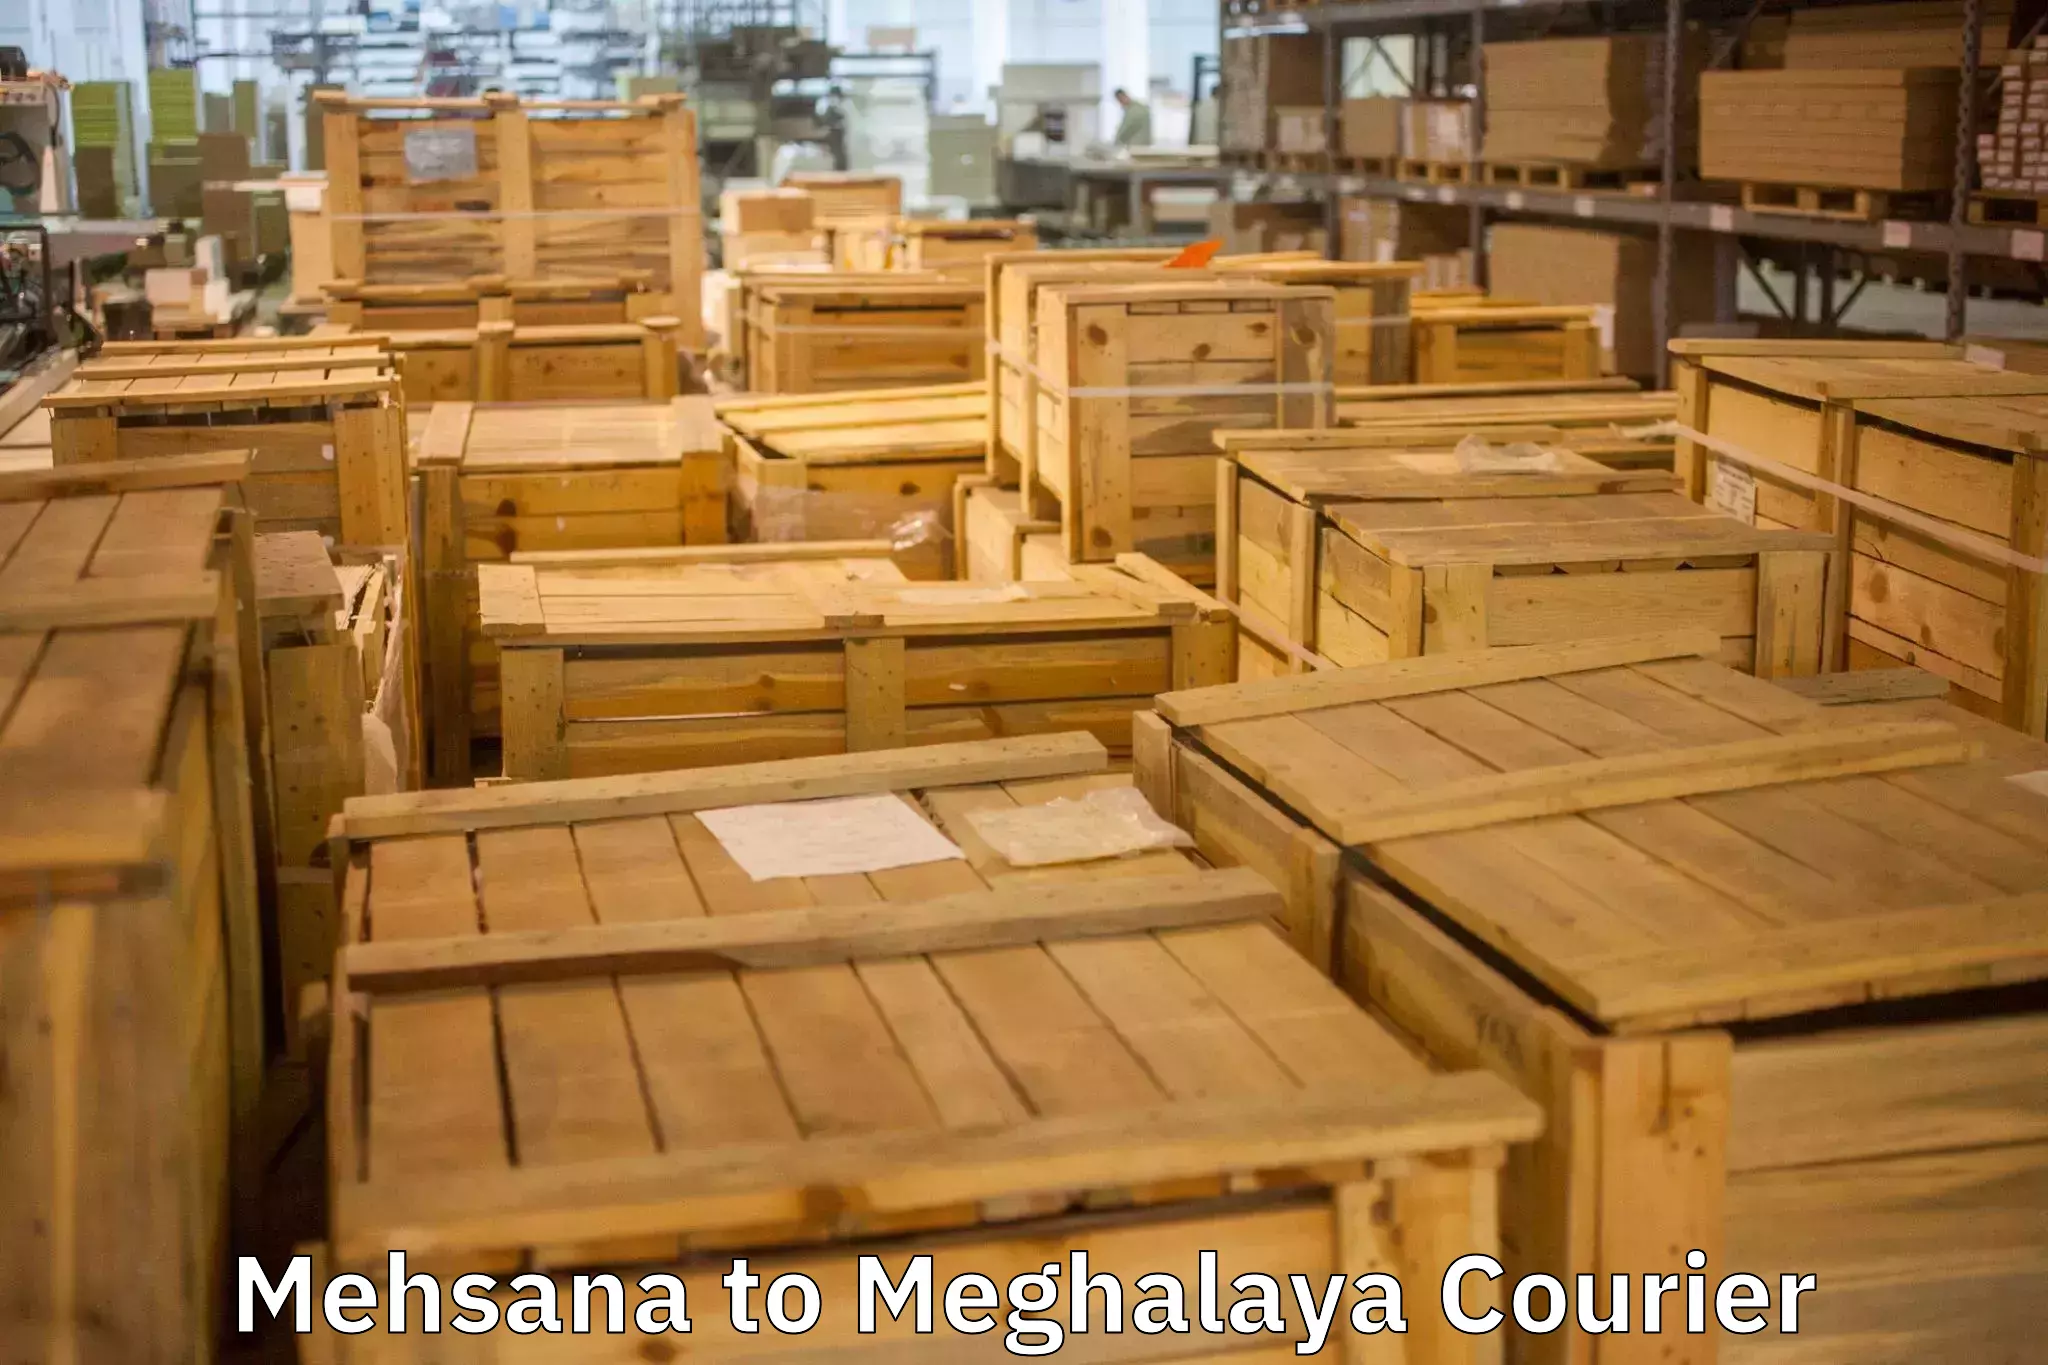 Furniture transport specialists Mehsana to Nongpoh